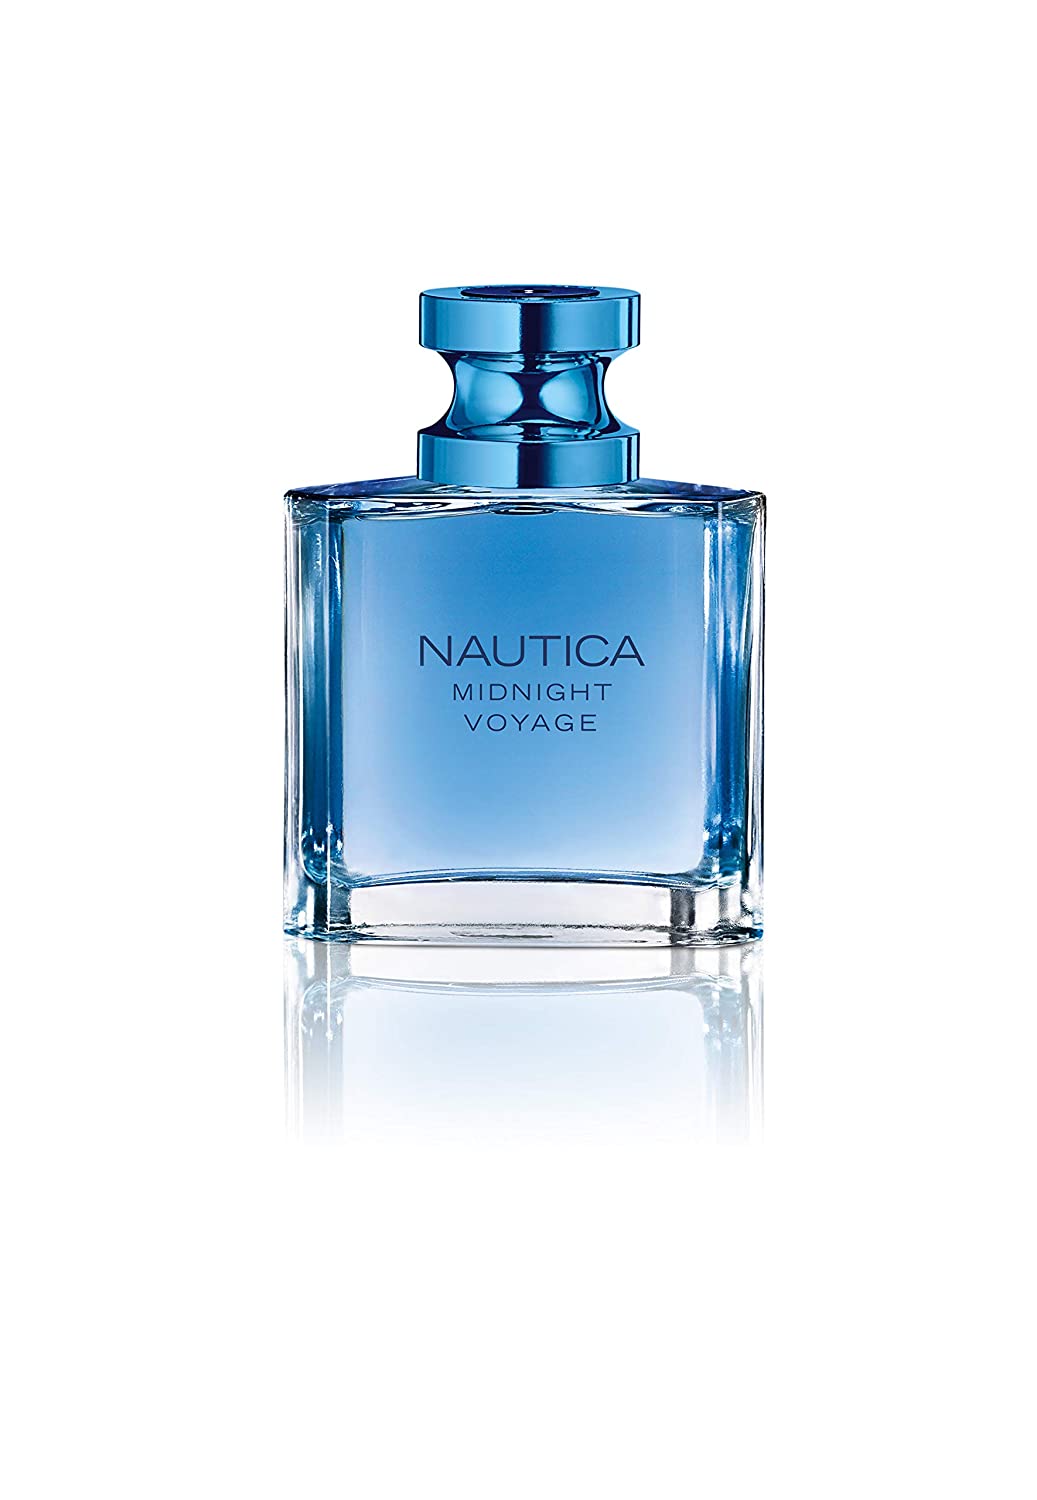 Nautica Voyage Eau De Toilette for Men - Woody, Aquatic Notes of Apple, Water Lotus, Cedarwood, and Musk - Fresh, Romantic, Fruity Scent - Ideal for Day Wear - 3.3 Fl Oz